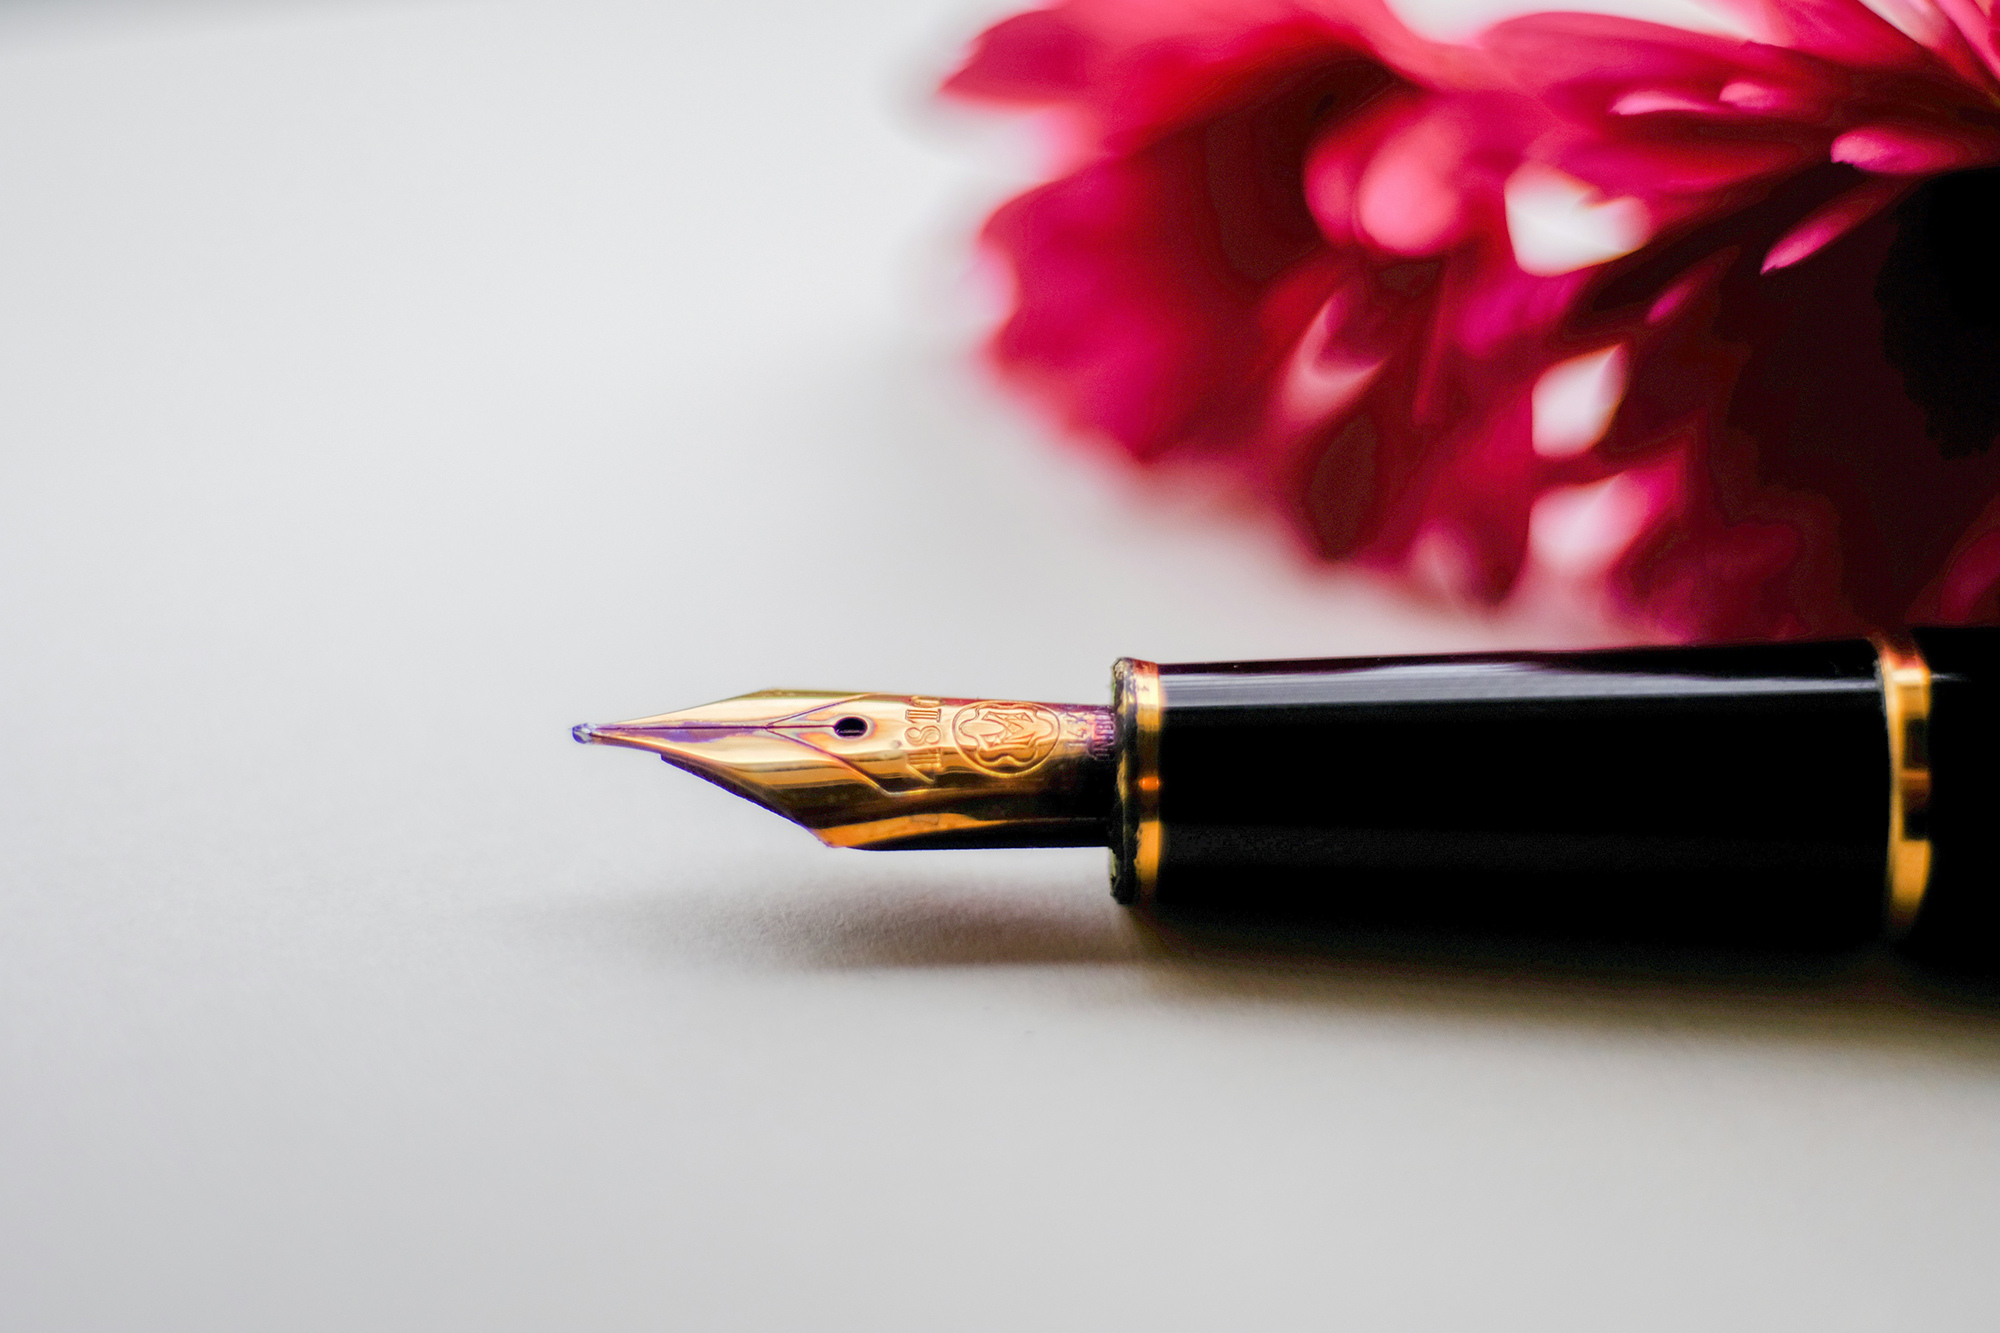 fountain pen laying on a white table with pink flower in the background